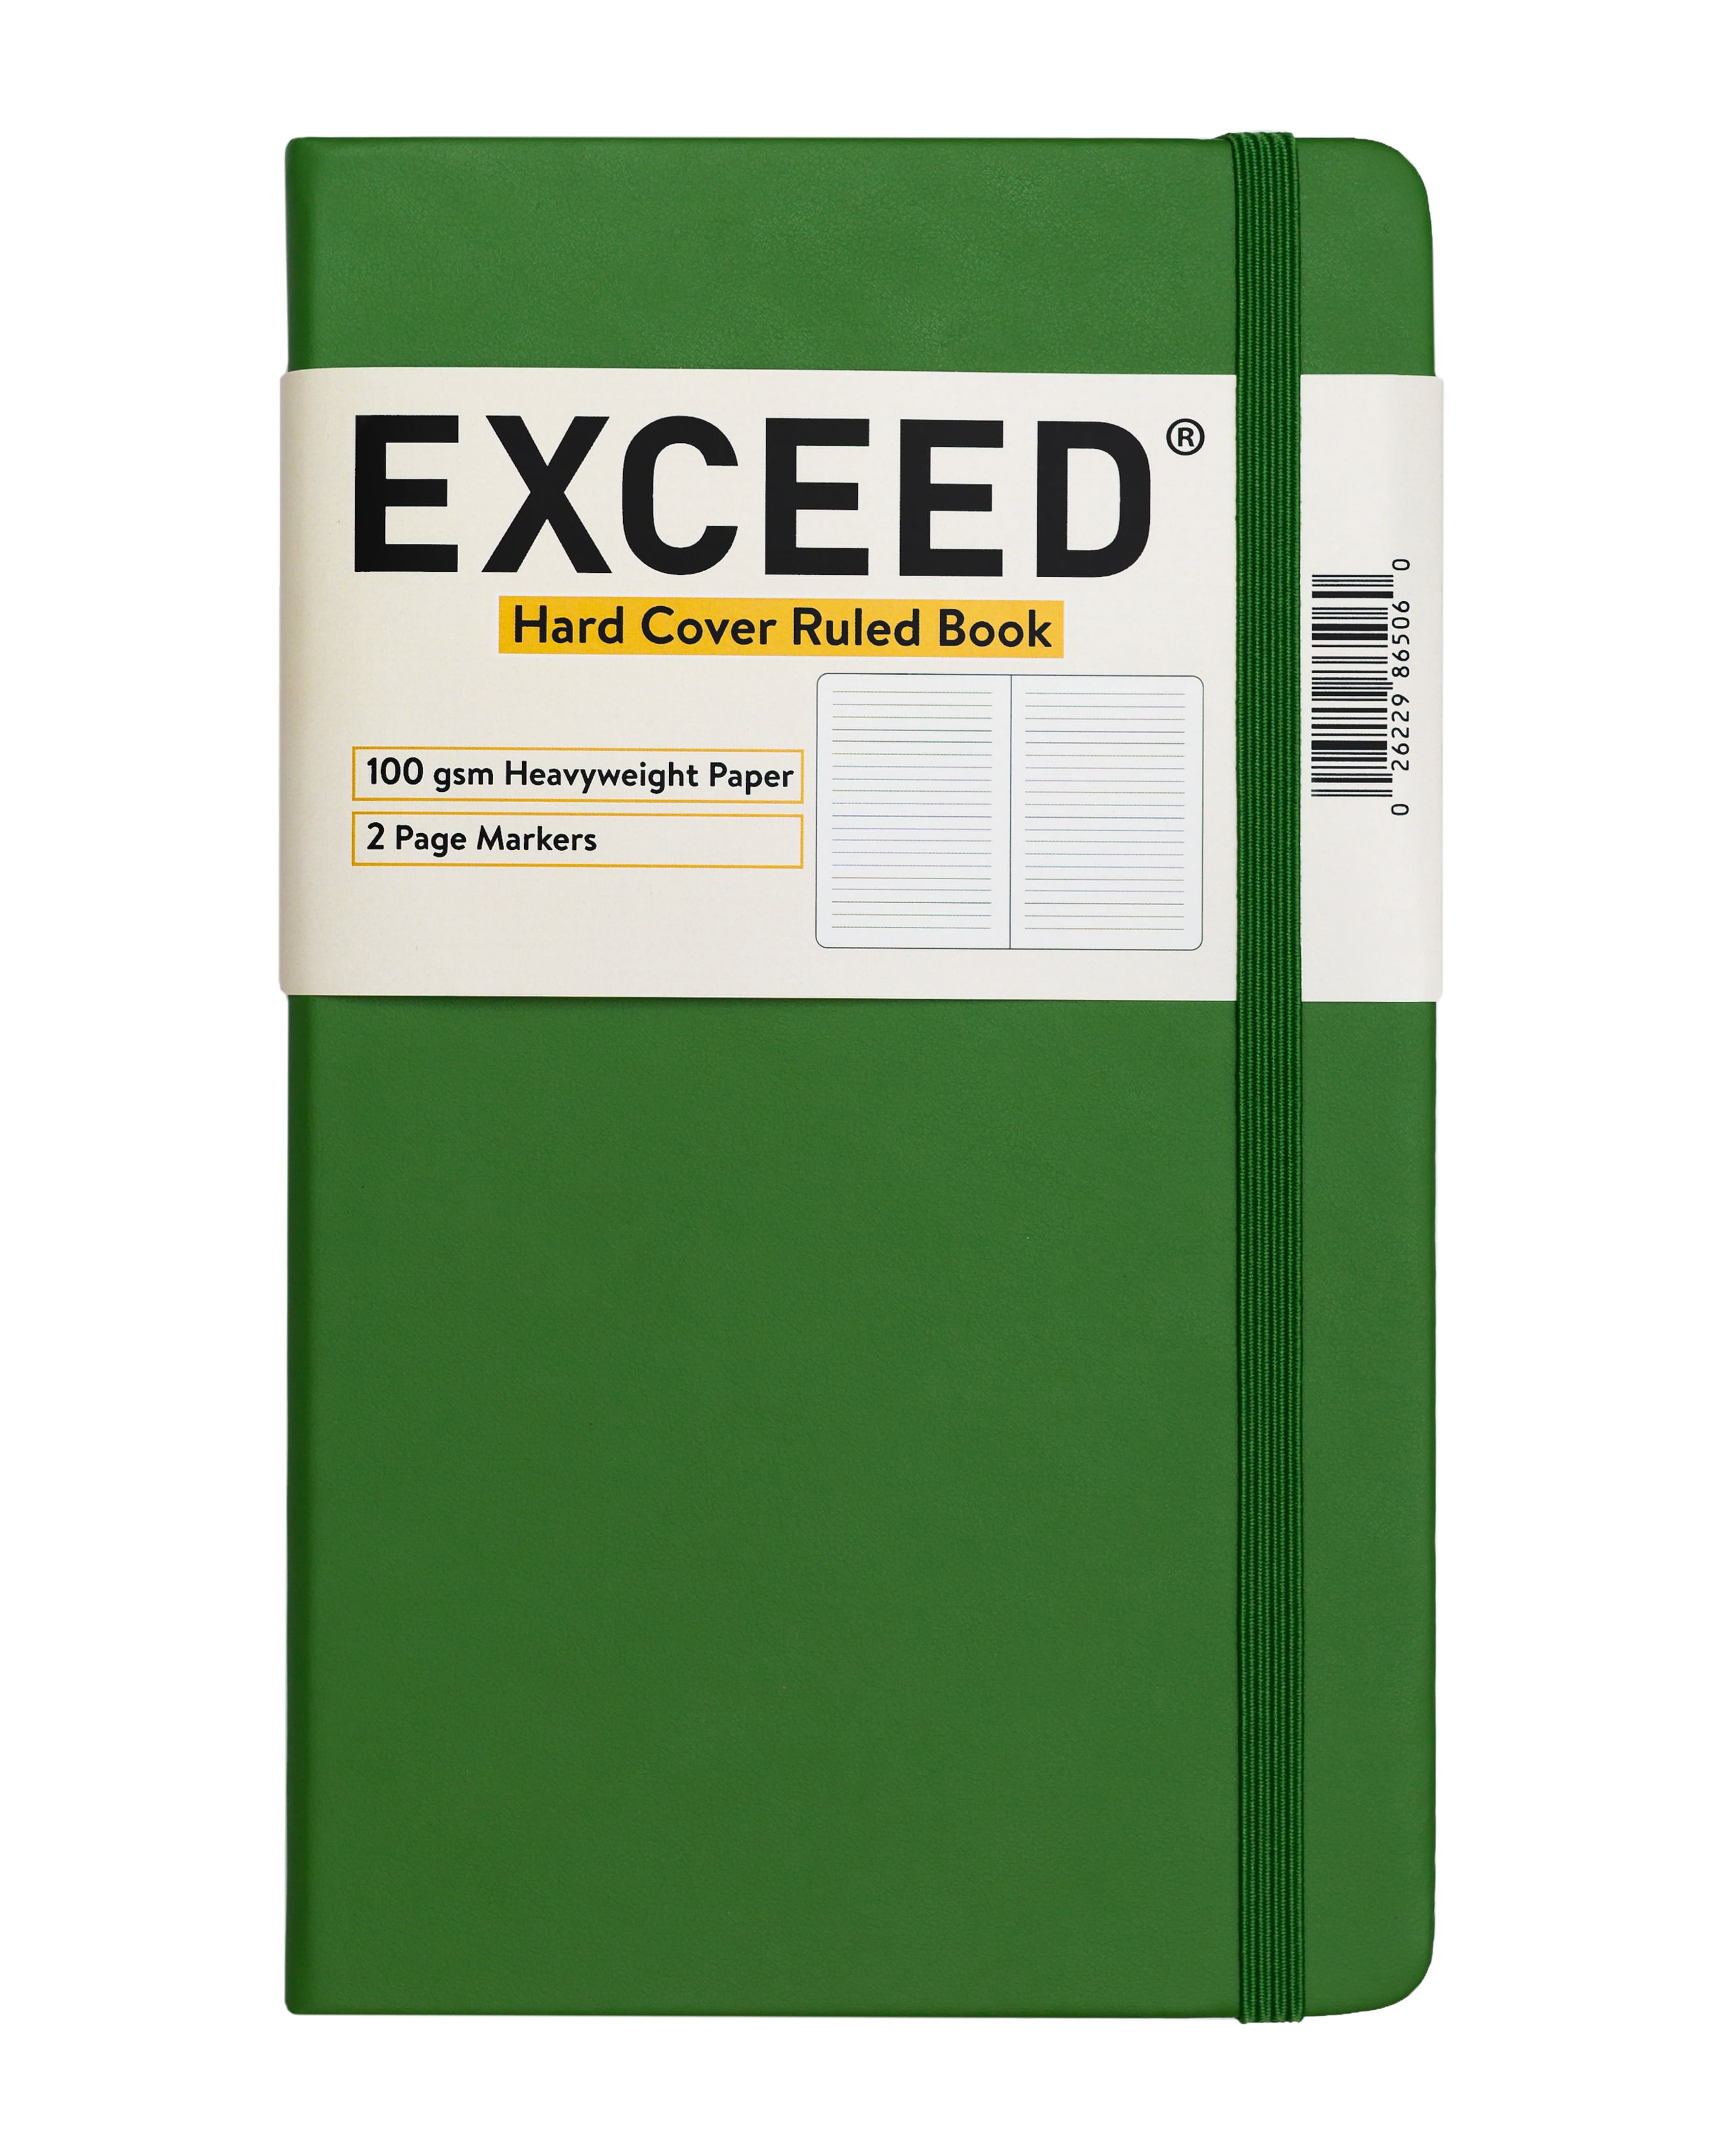 Exceed Medium Ruled Journal, Moss Green, 120 Sheets, 100 GSM